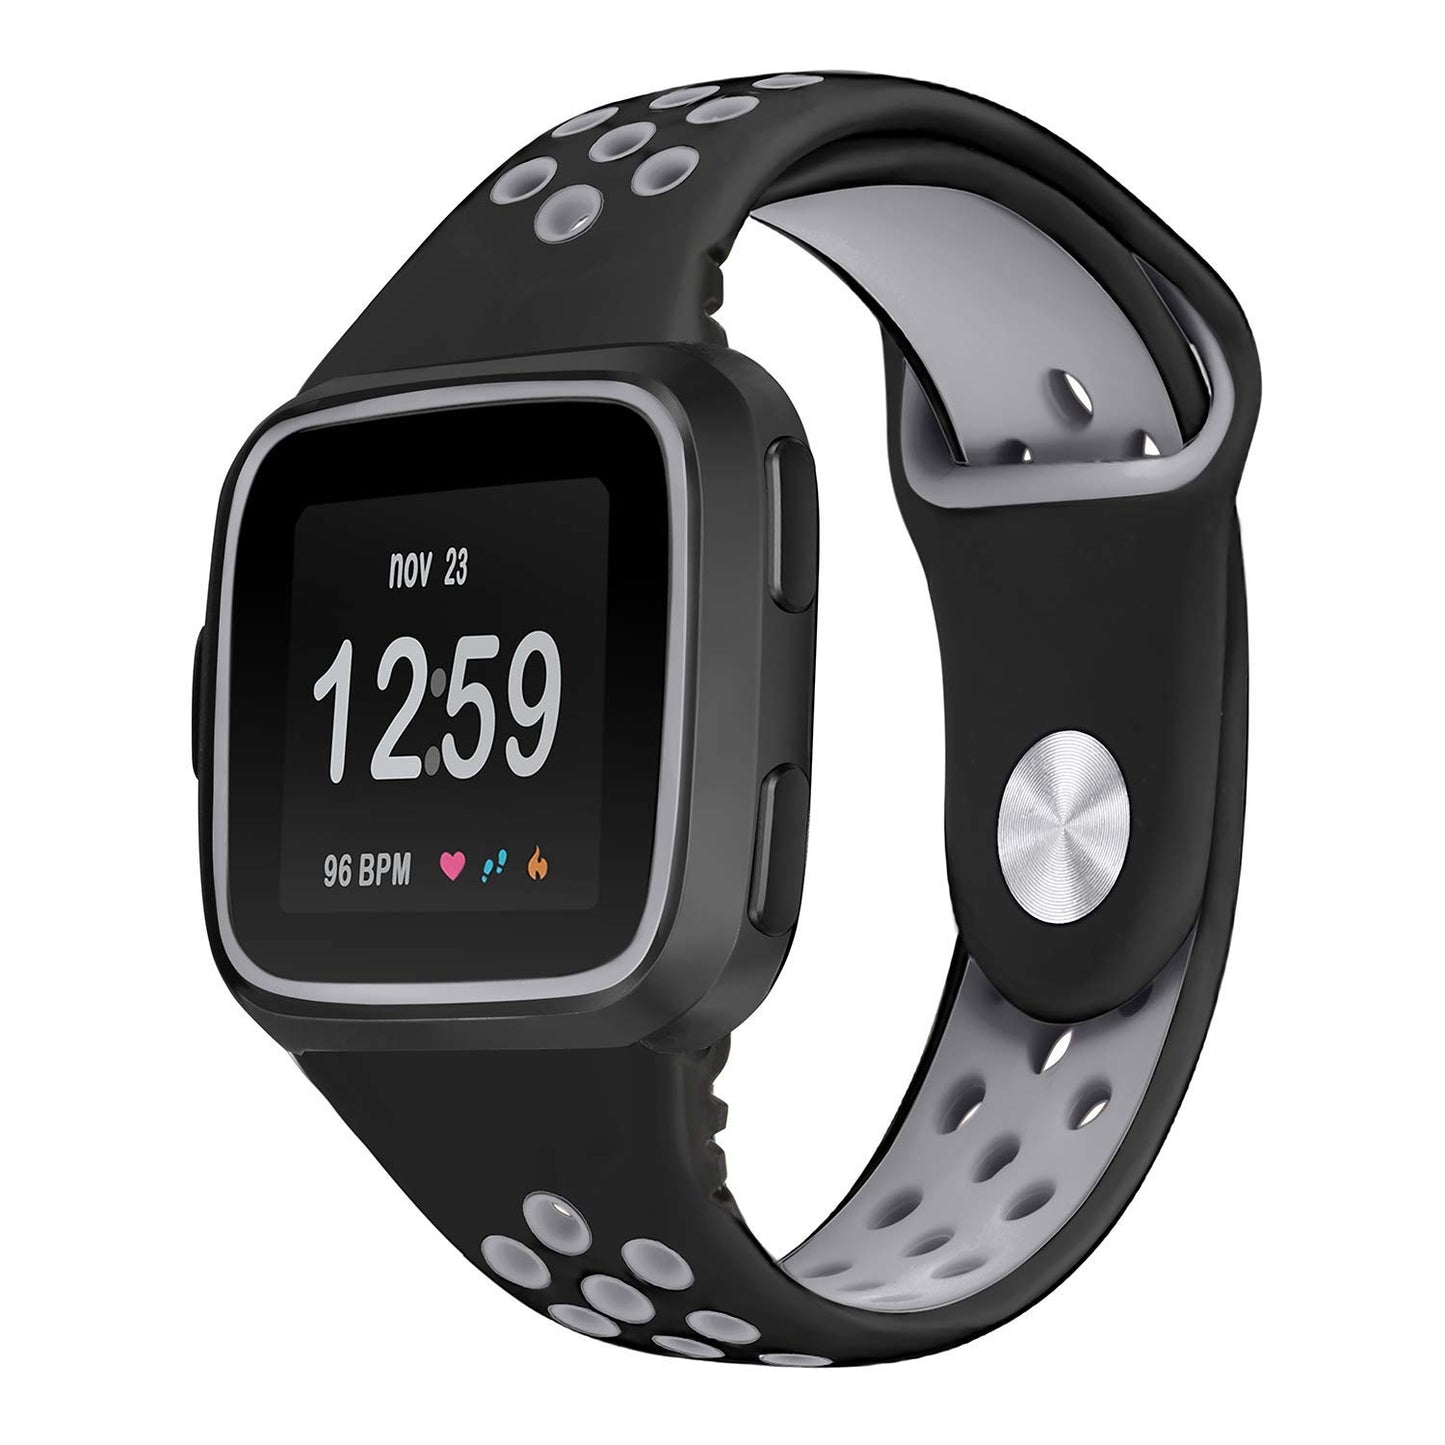 Perforated Rubber Strap with Protective Case for Fitbit Versa